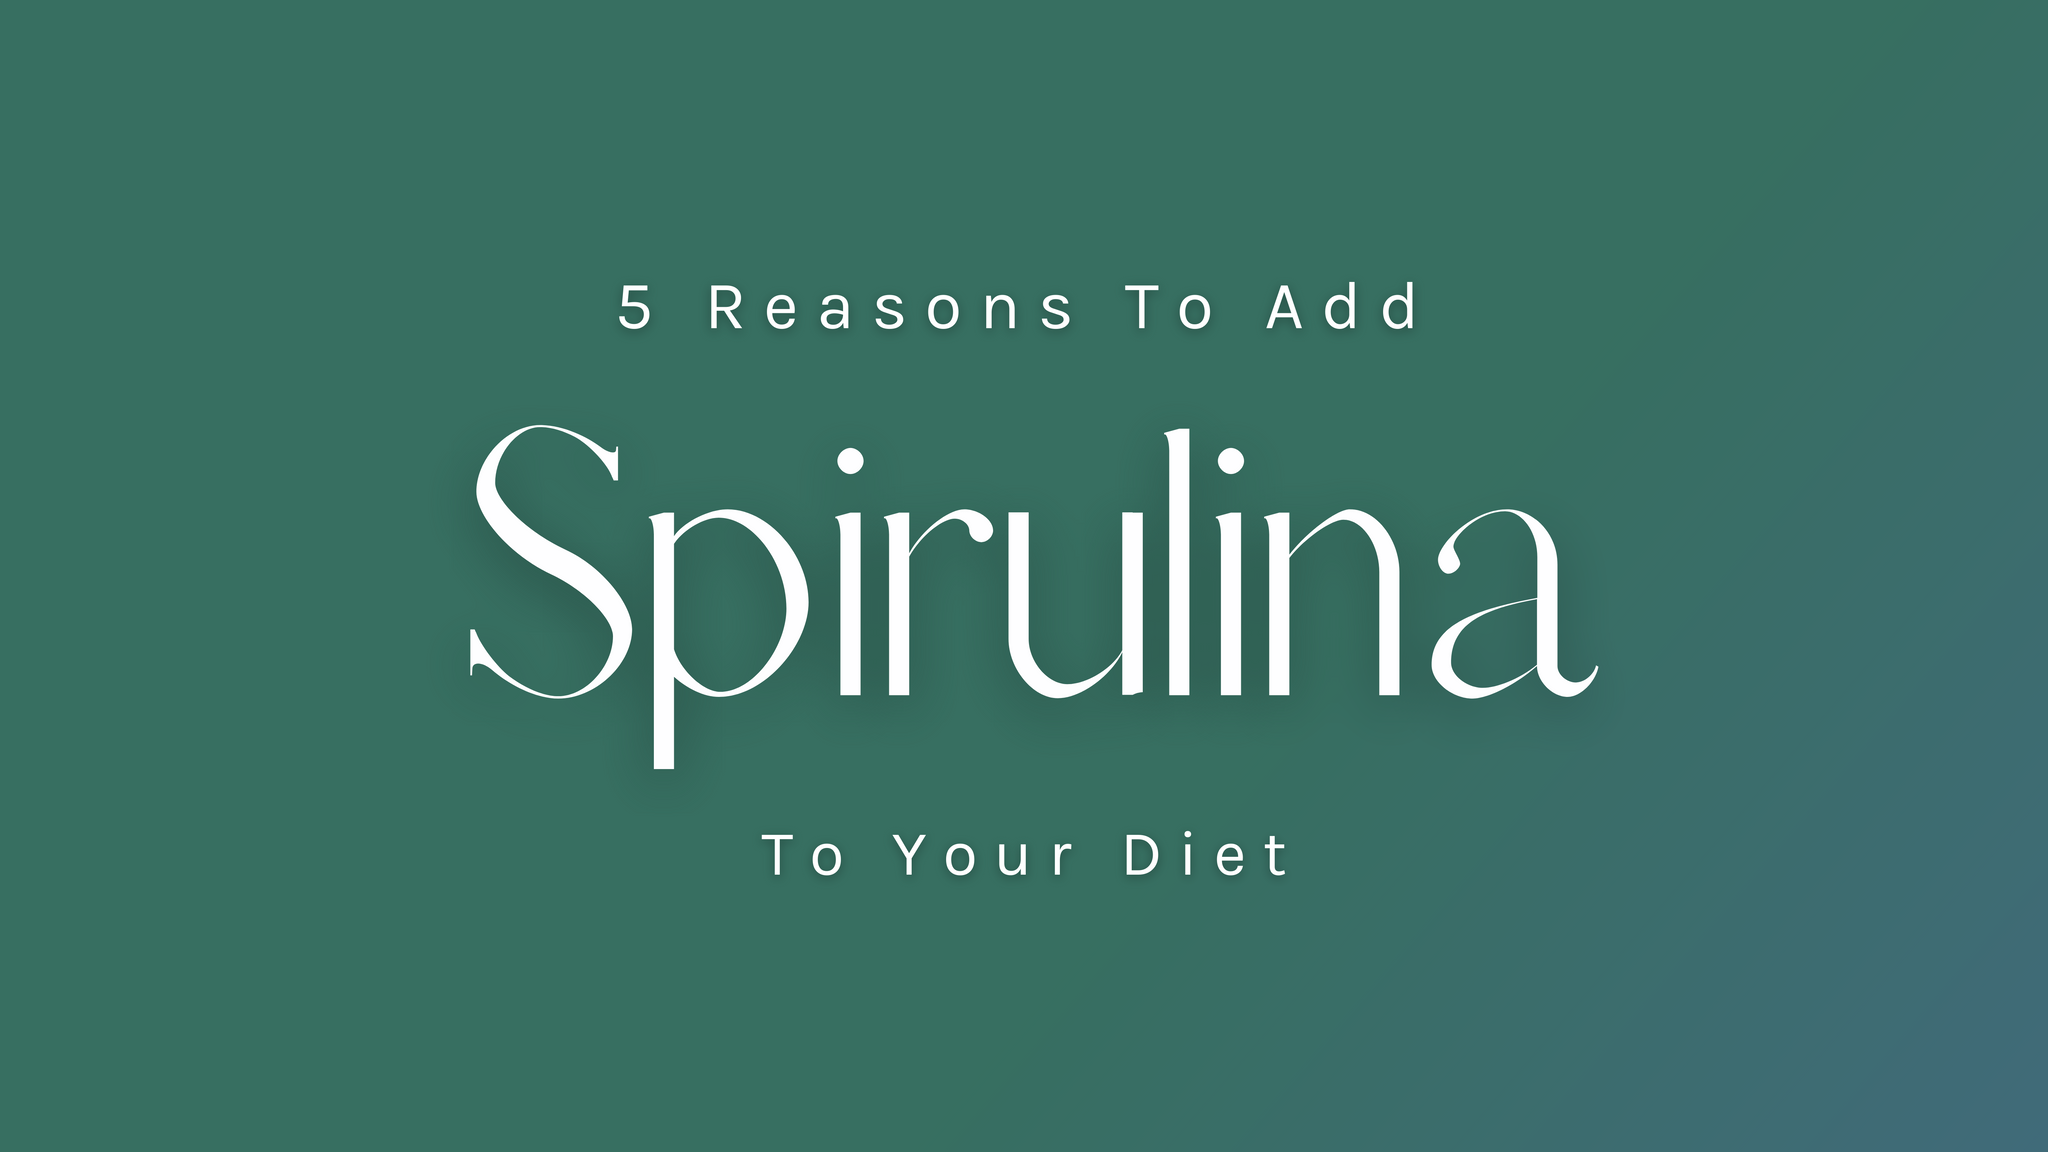 5 Reasons To Add Spirulina To Your Diet